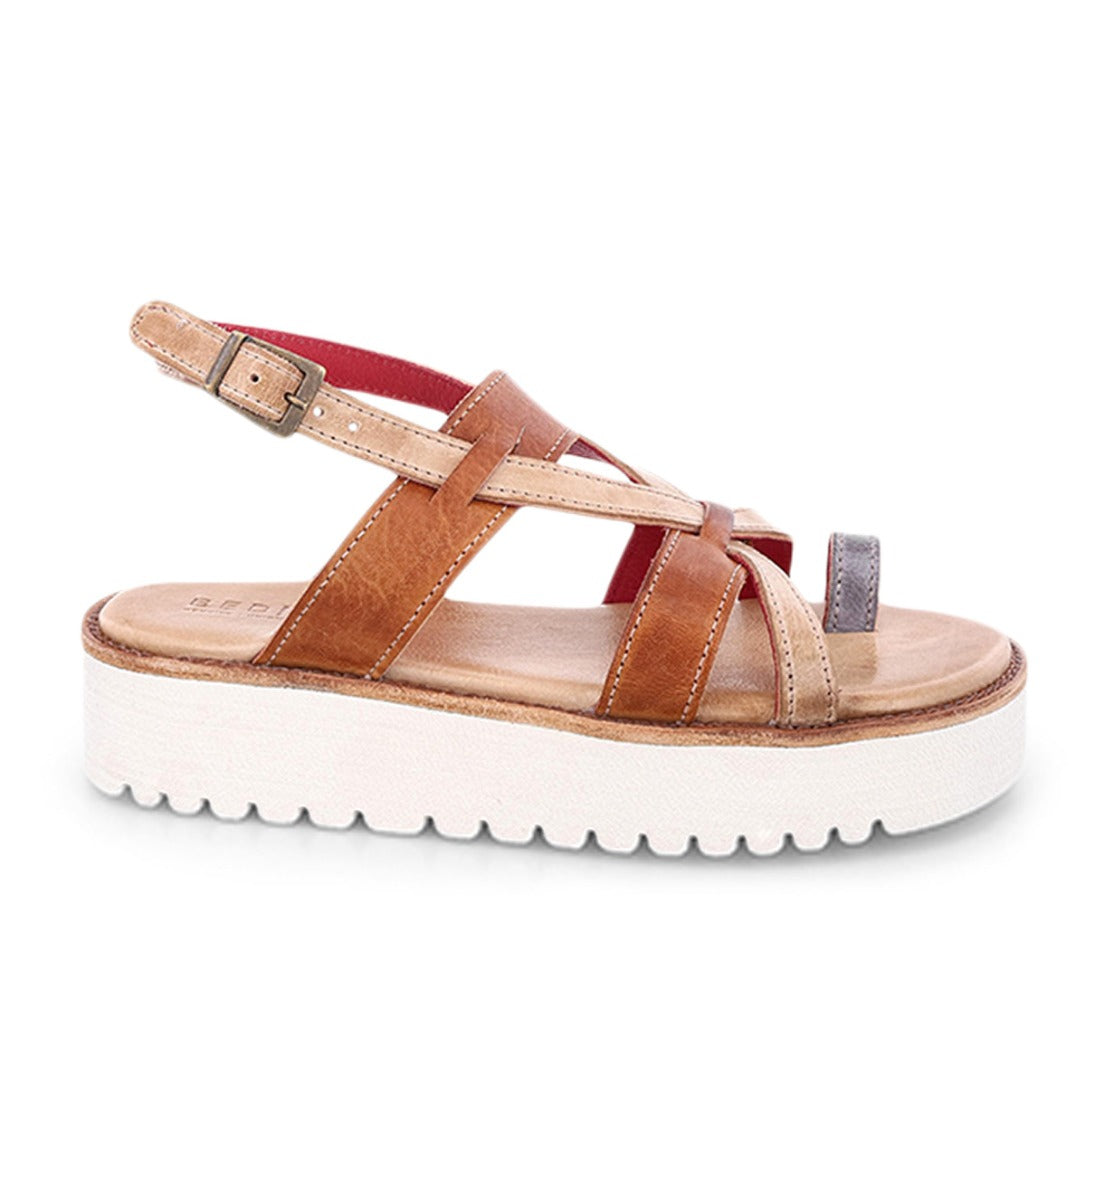 A Bed Stu women's Crawler sandal with two straps and a white sole.